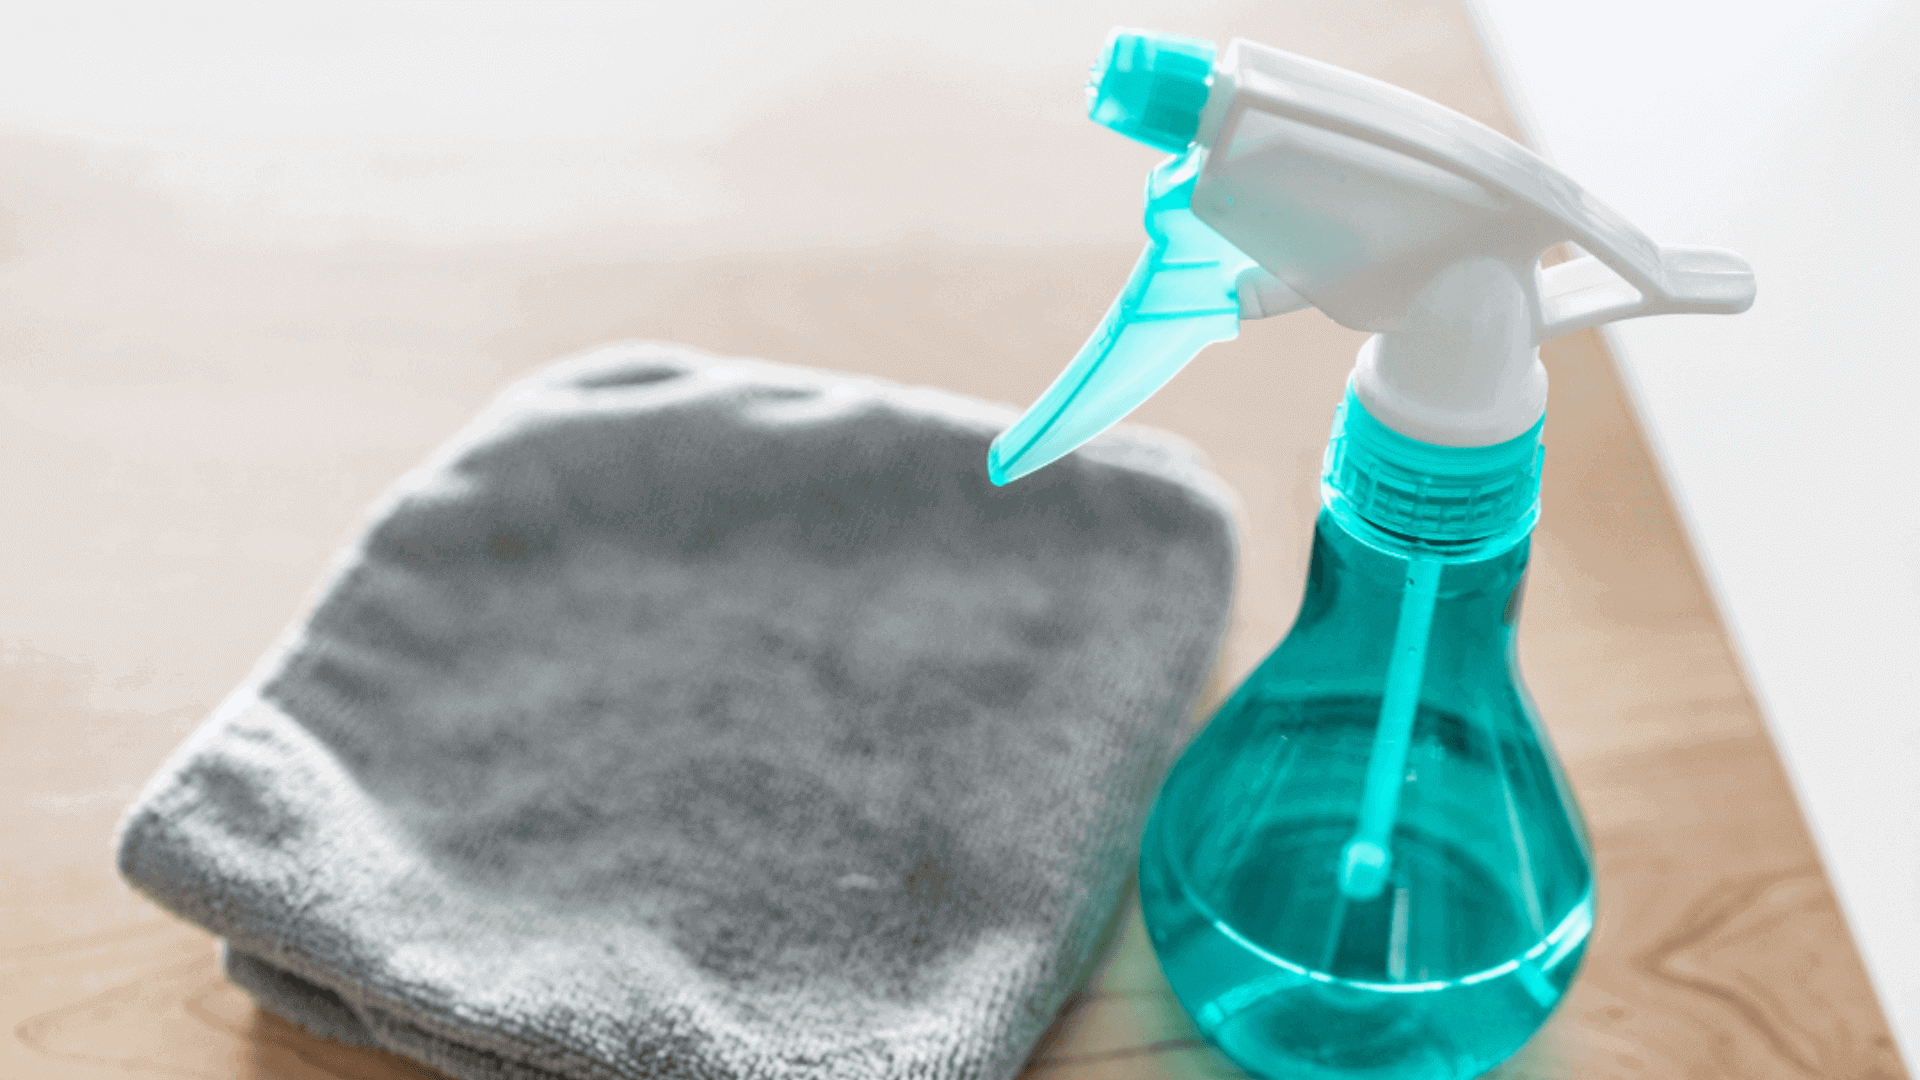 All-purpose cleaner